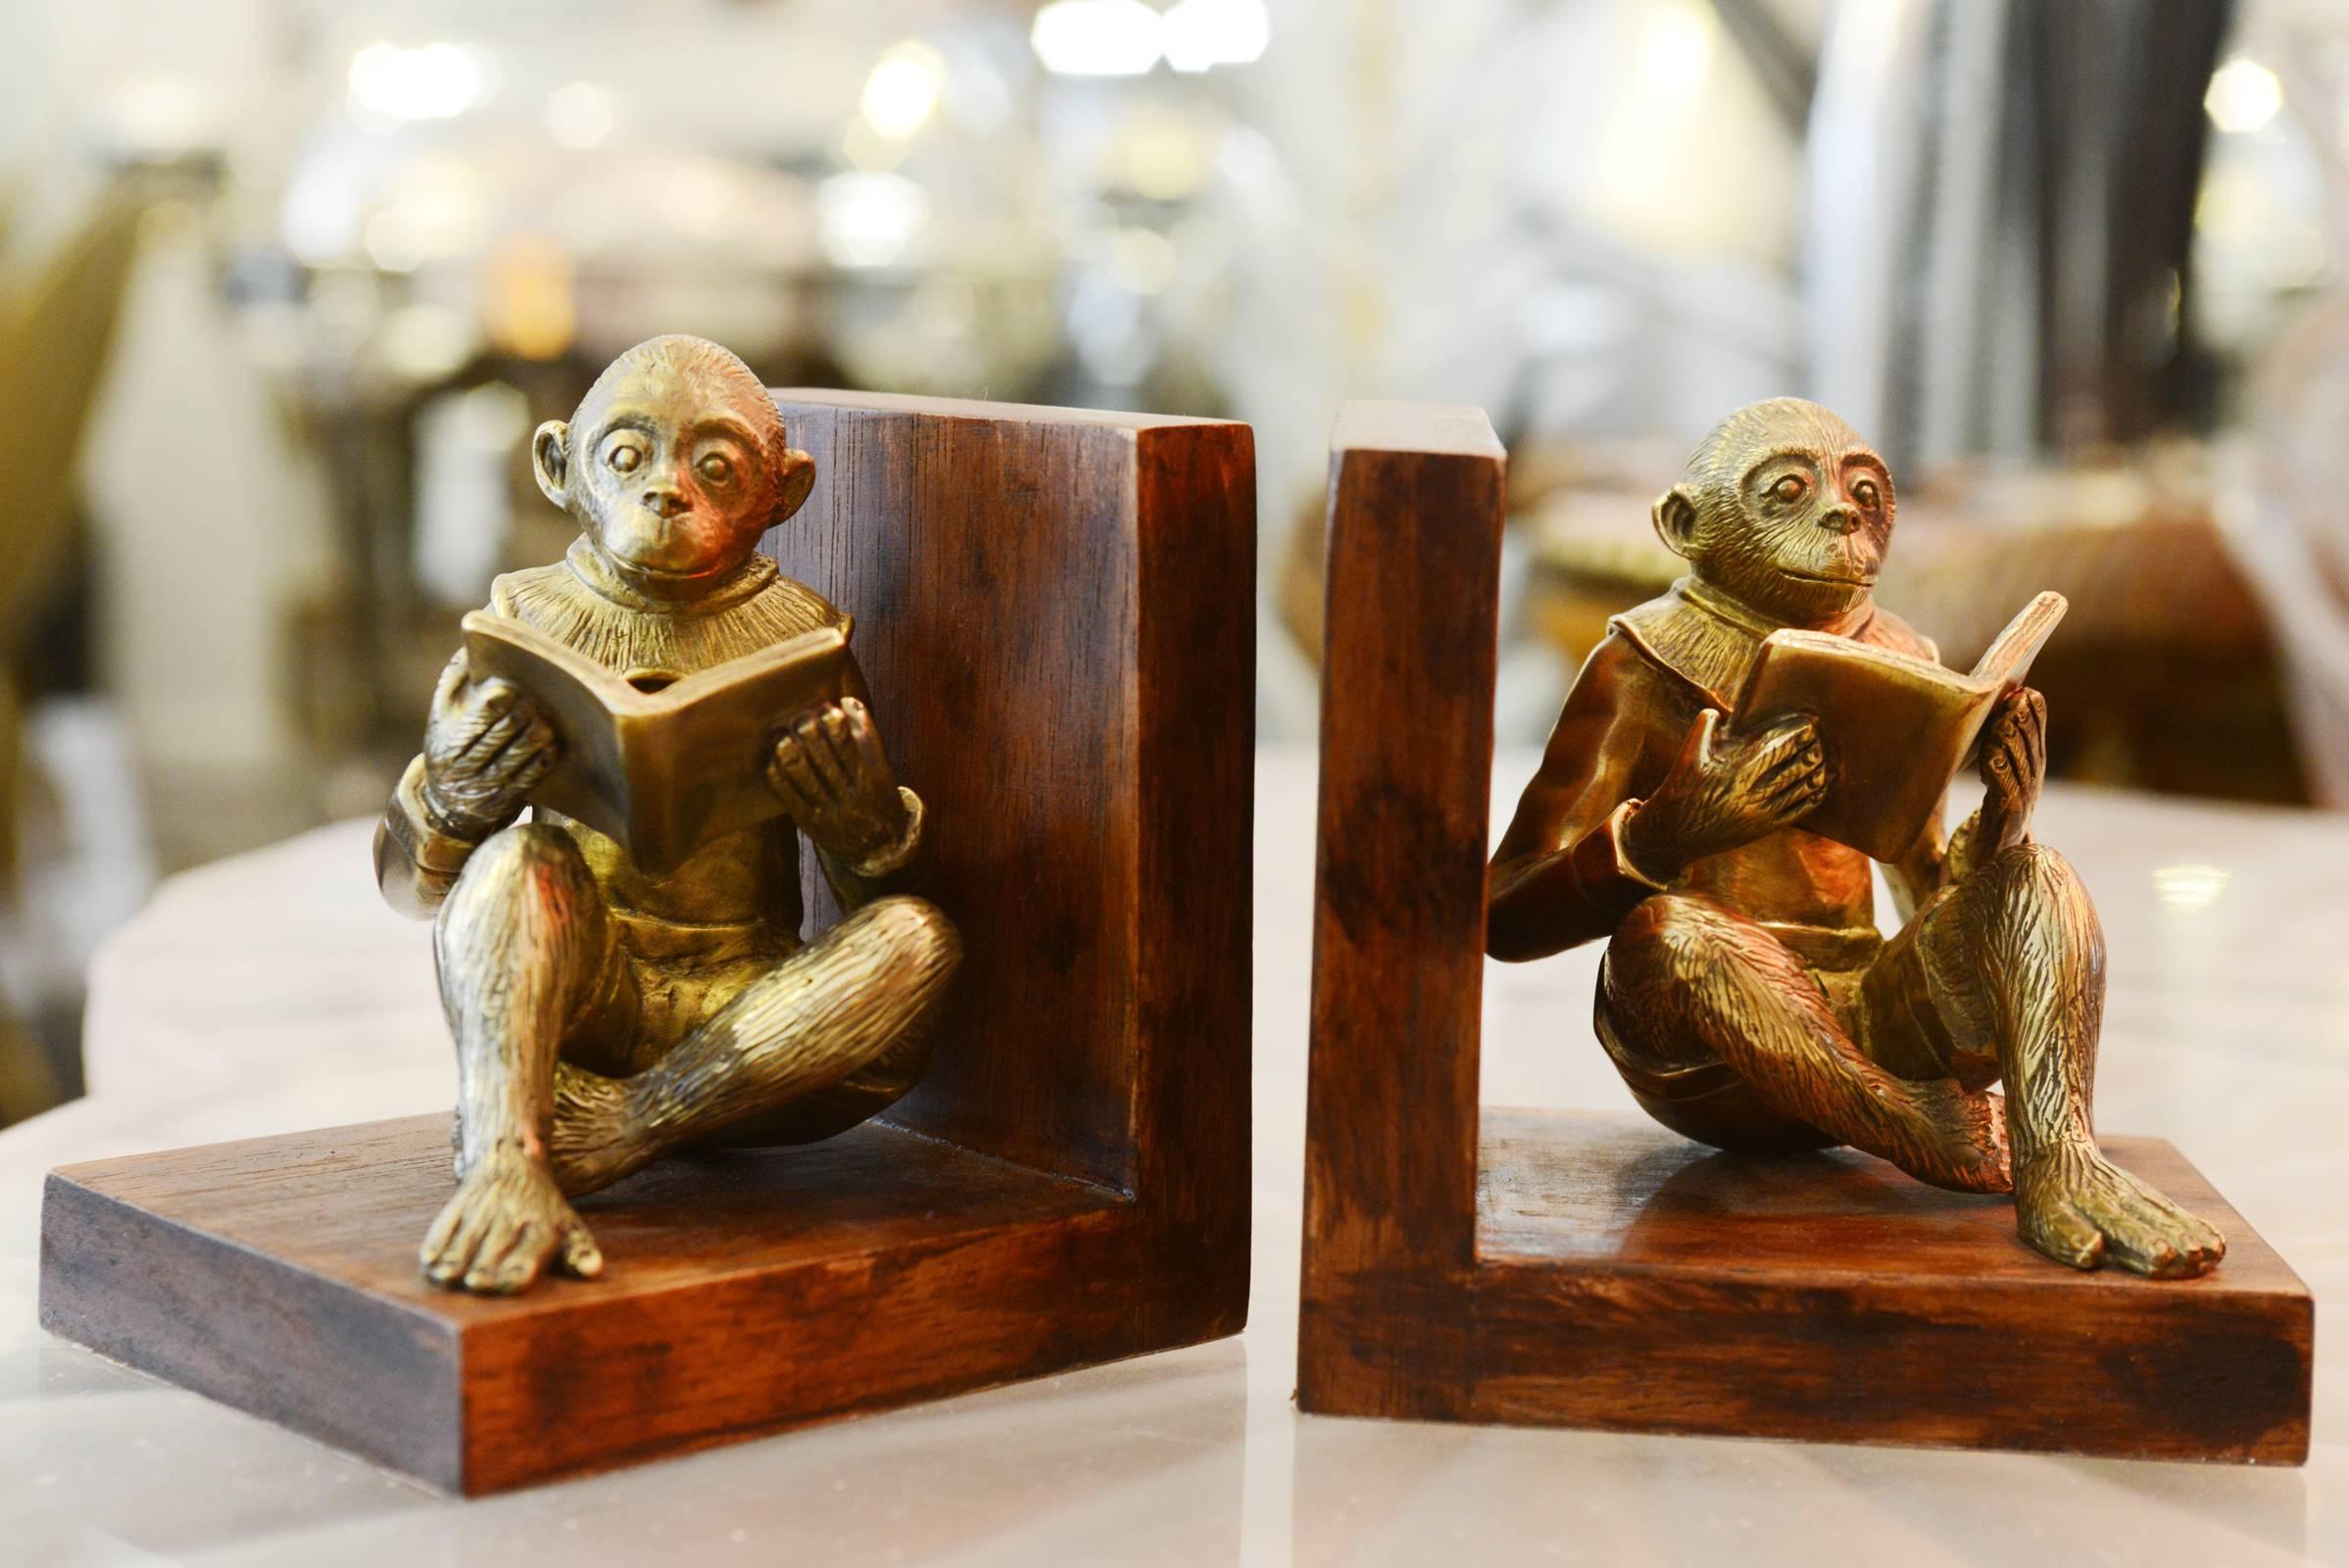 Bookends set of two monkeys readers
in hand-carved bronze. On noble wood base.
Each piece: L 12.7 x D 10 x H 12.5cm 
